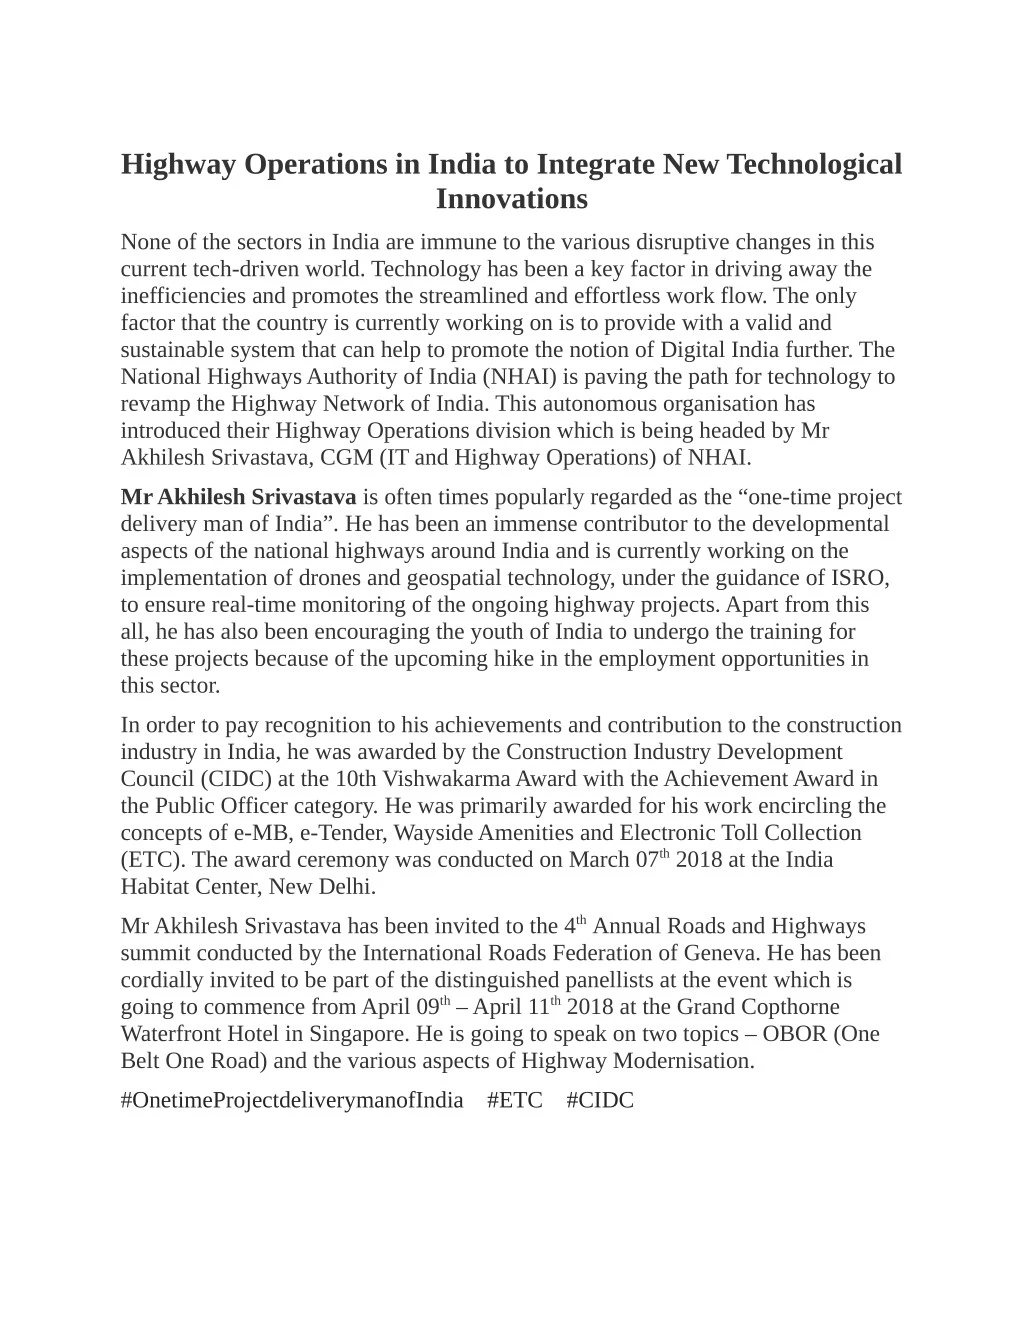 highway operations in india to integrate